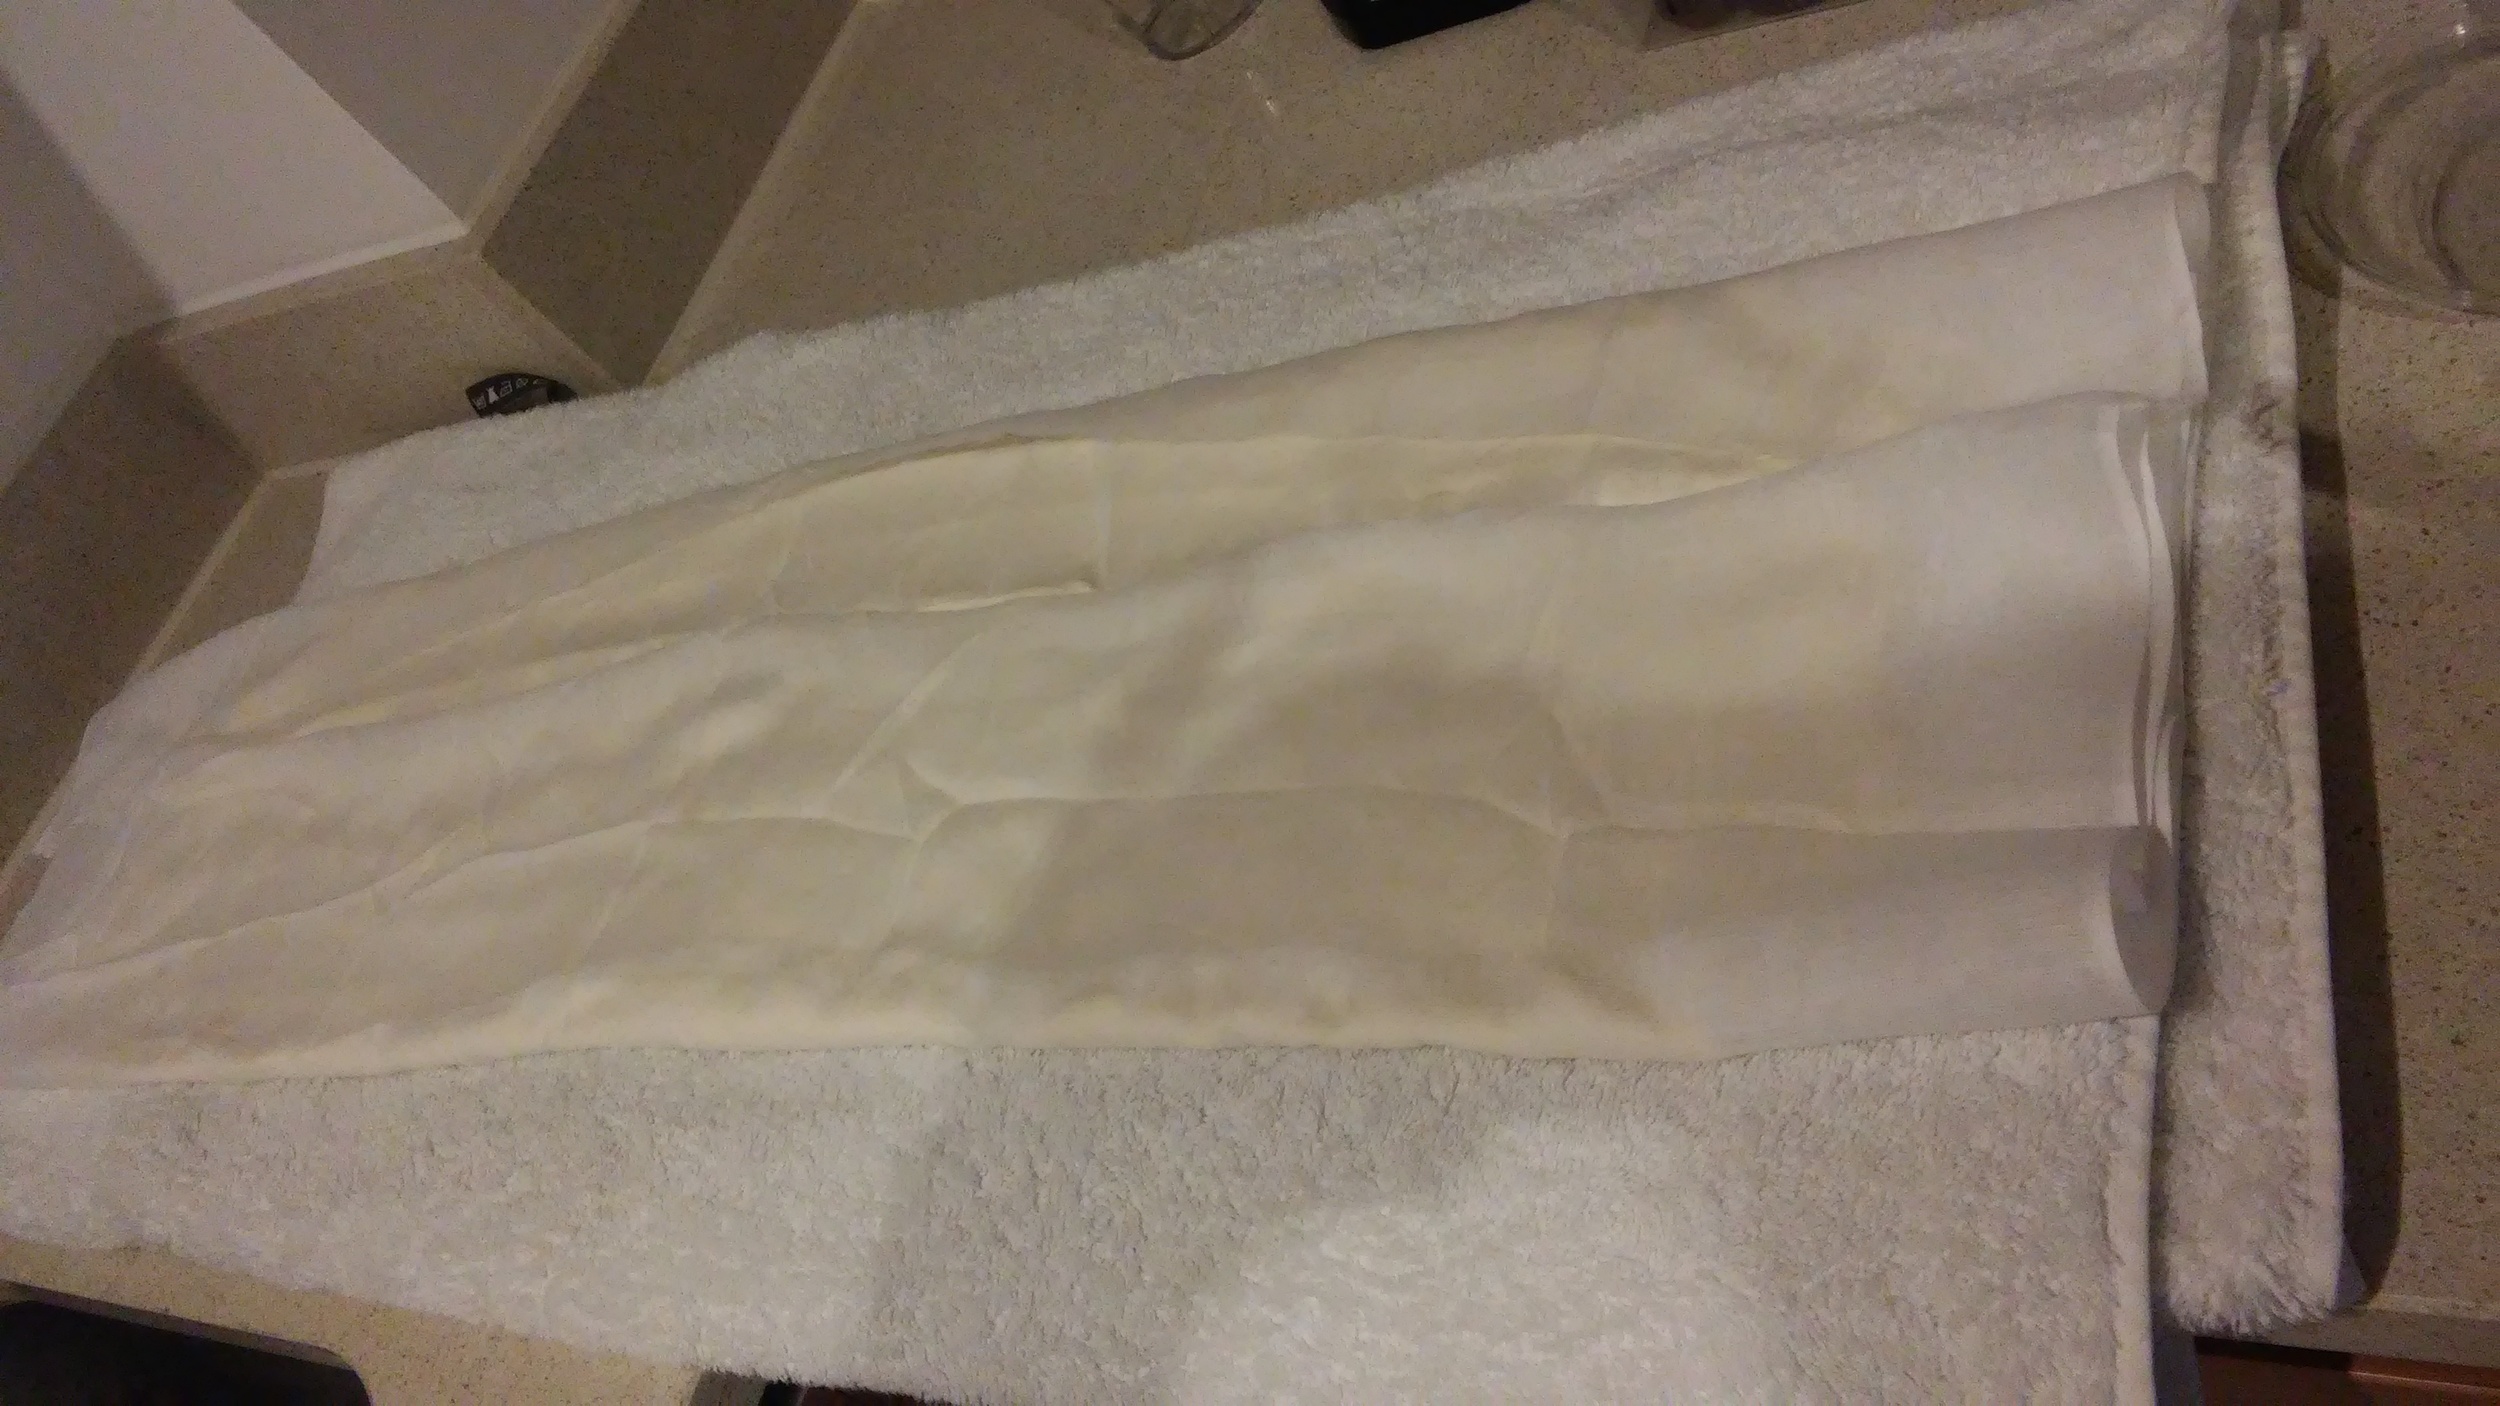 Both sides of the muslin cloth have been folded over to cover the yoghurt